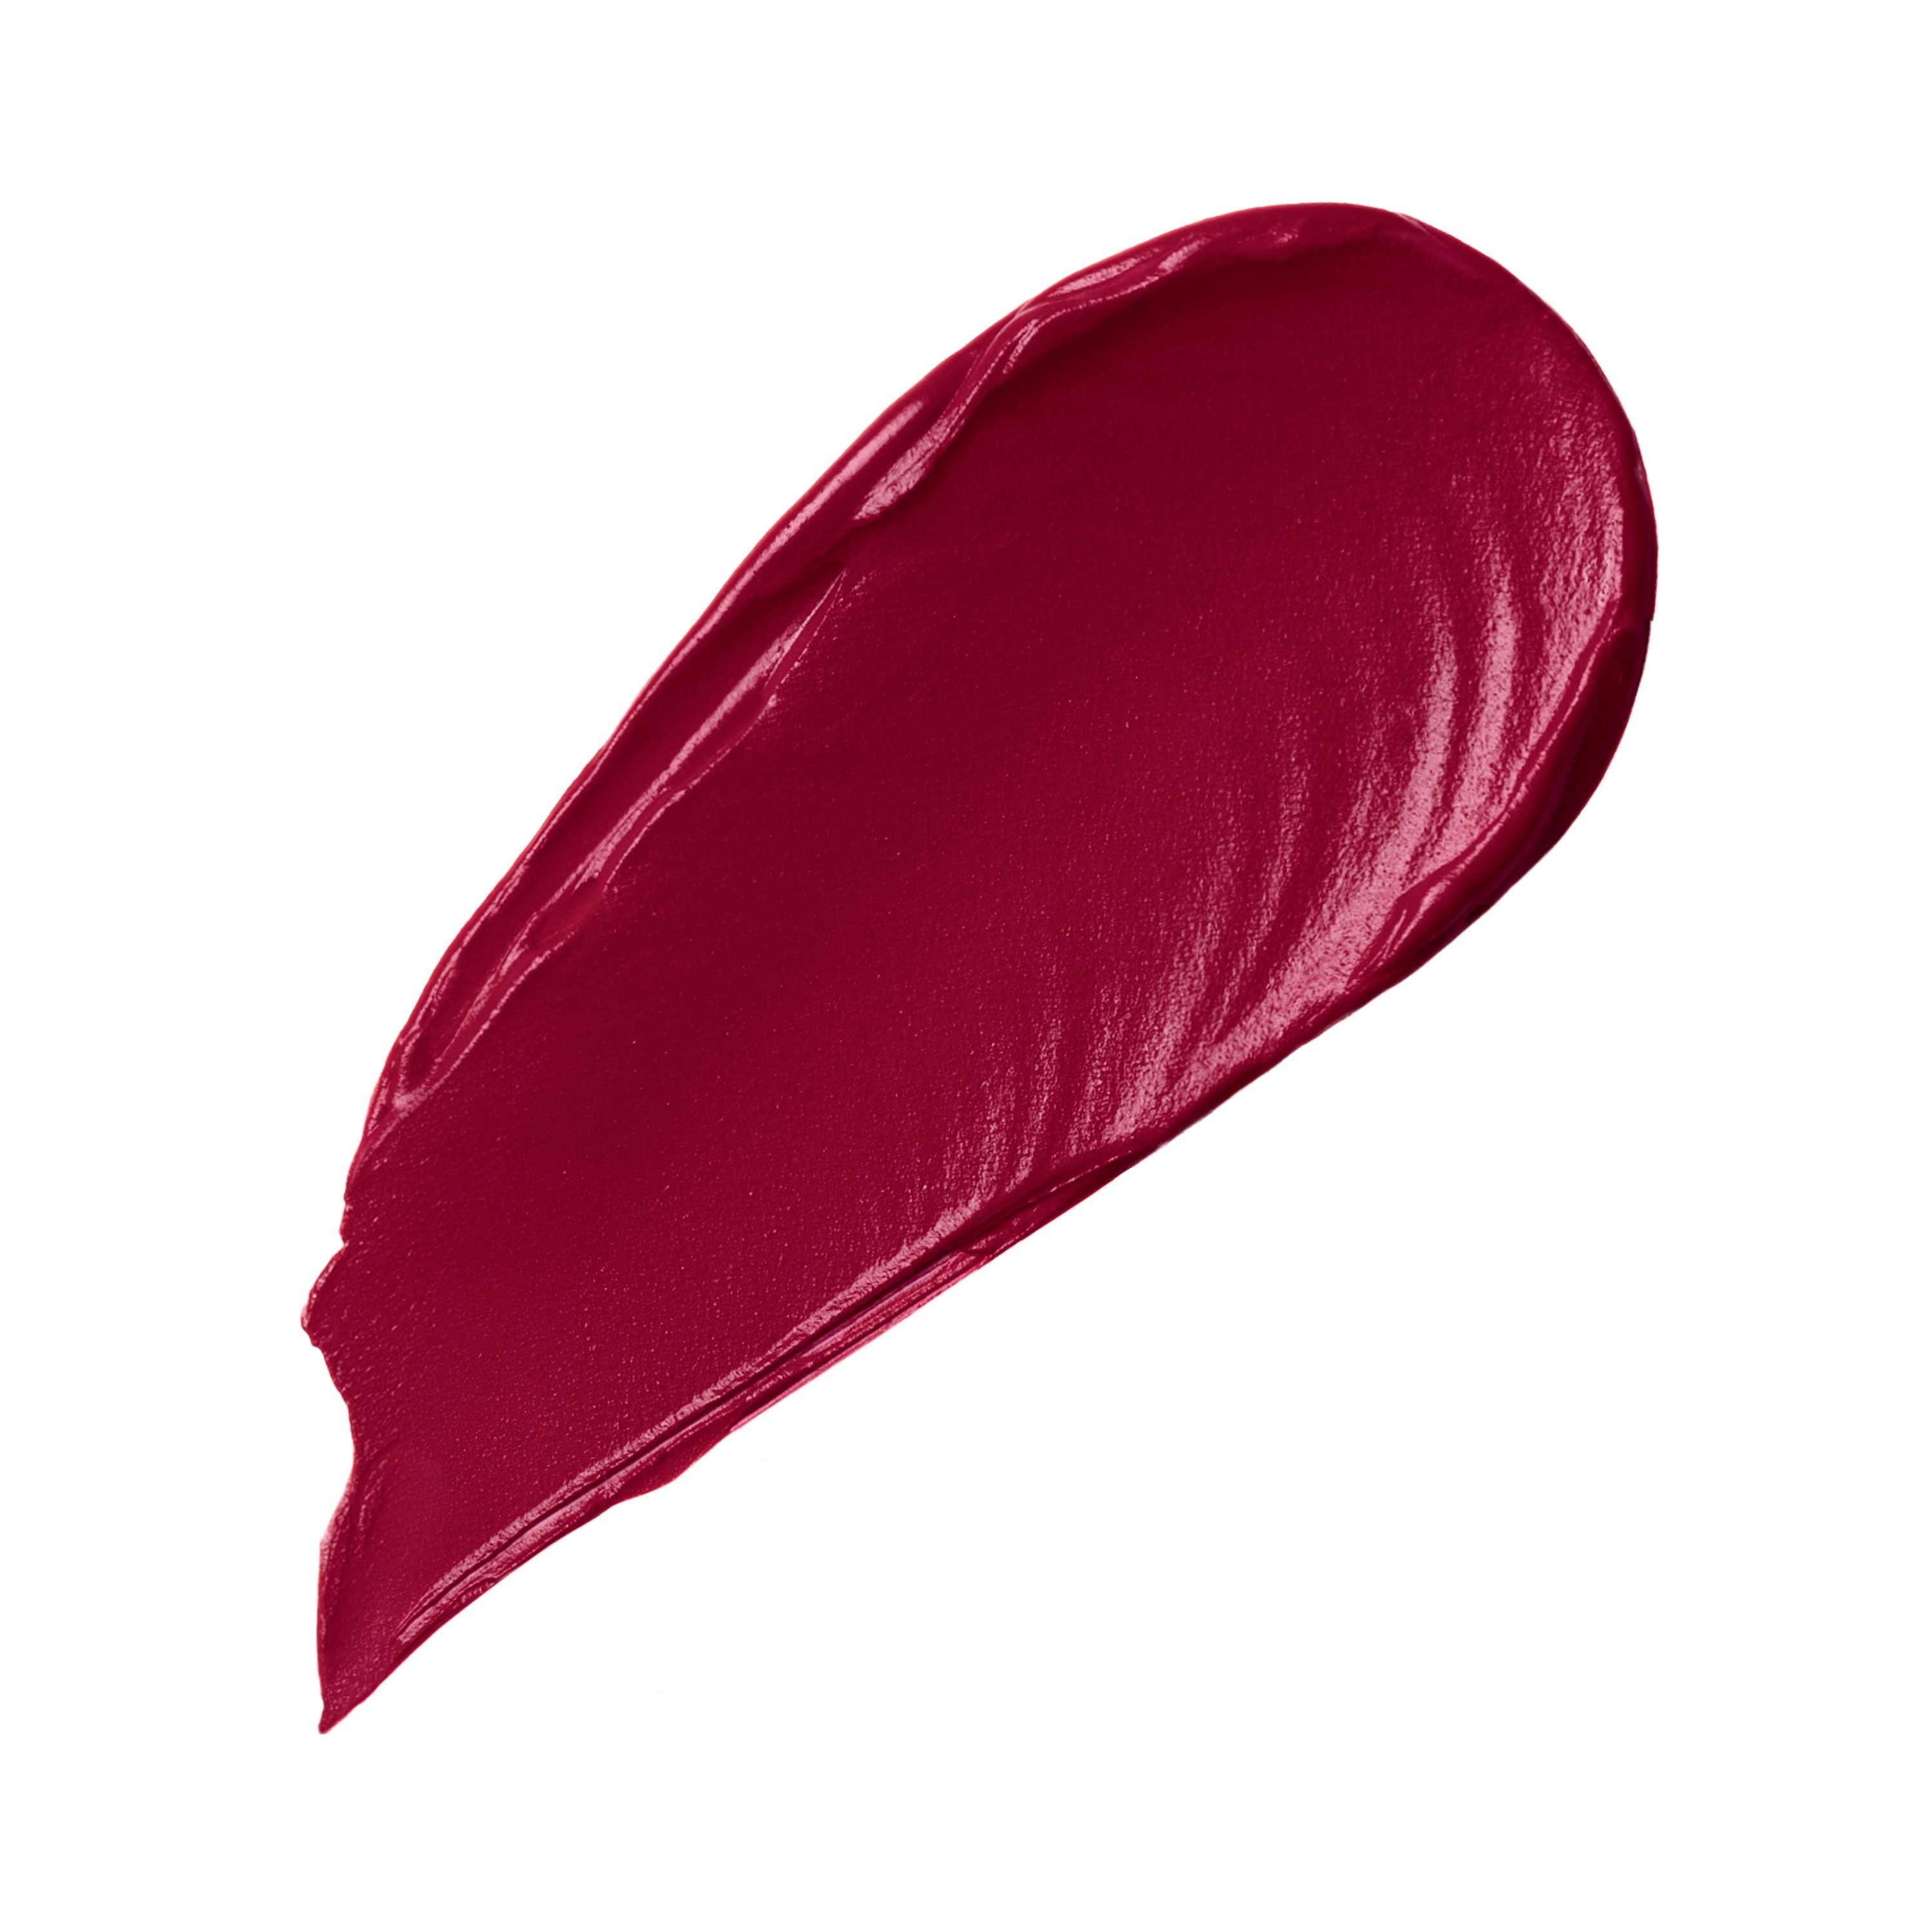 Keep It Spicy Full-On™ Plumping Lip Matte